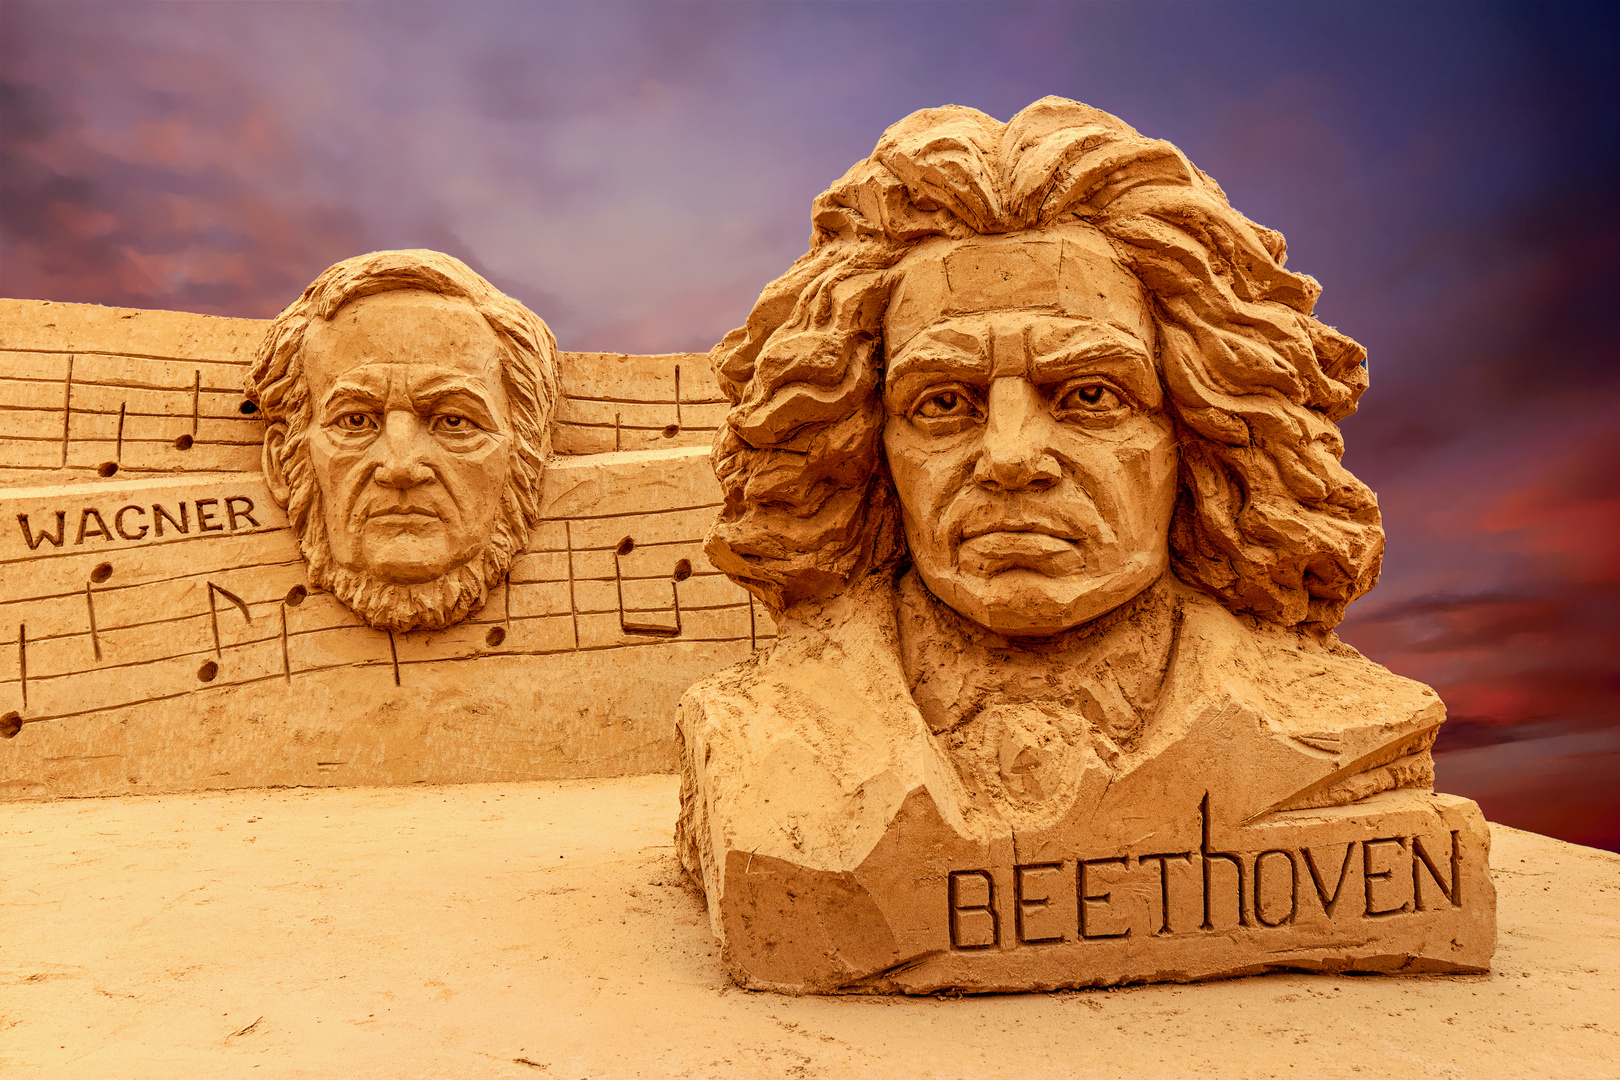 Wagner & Beethoven